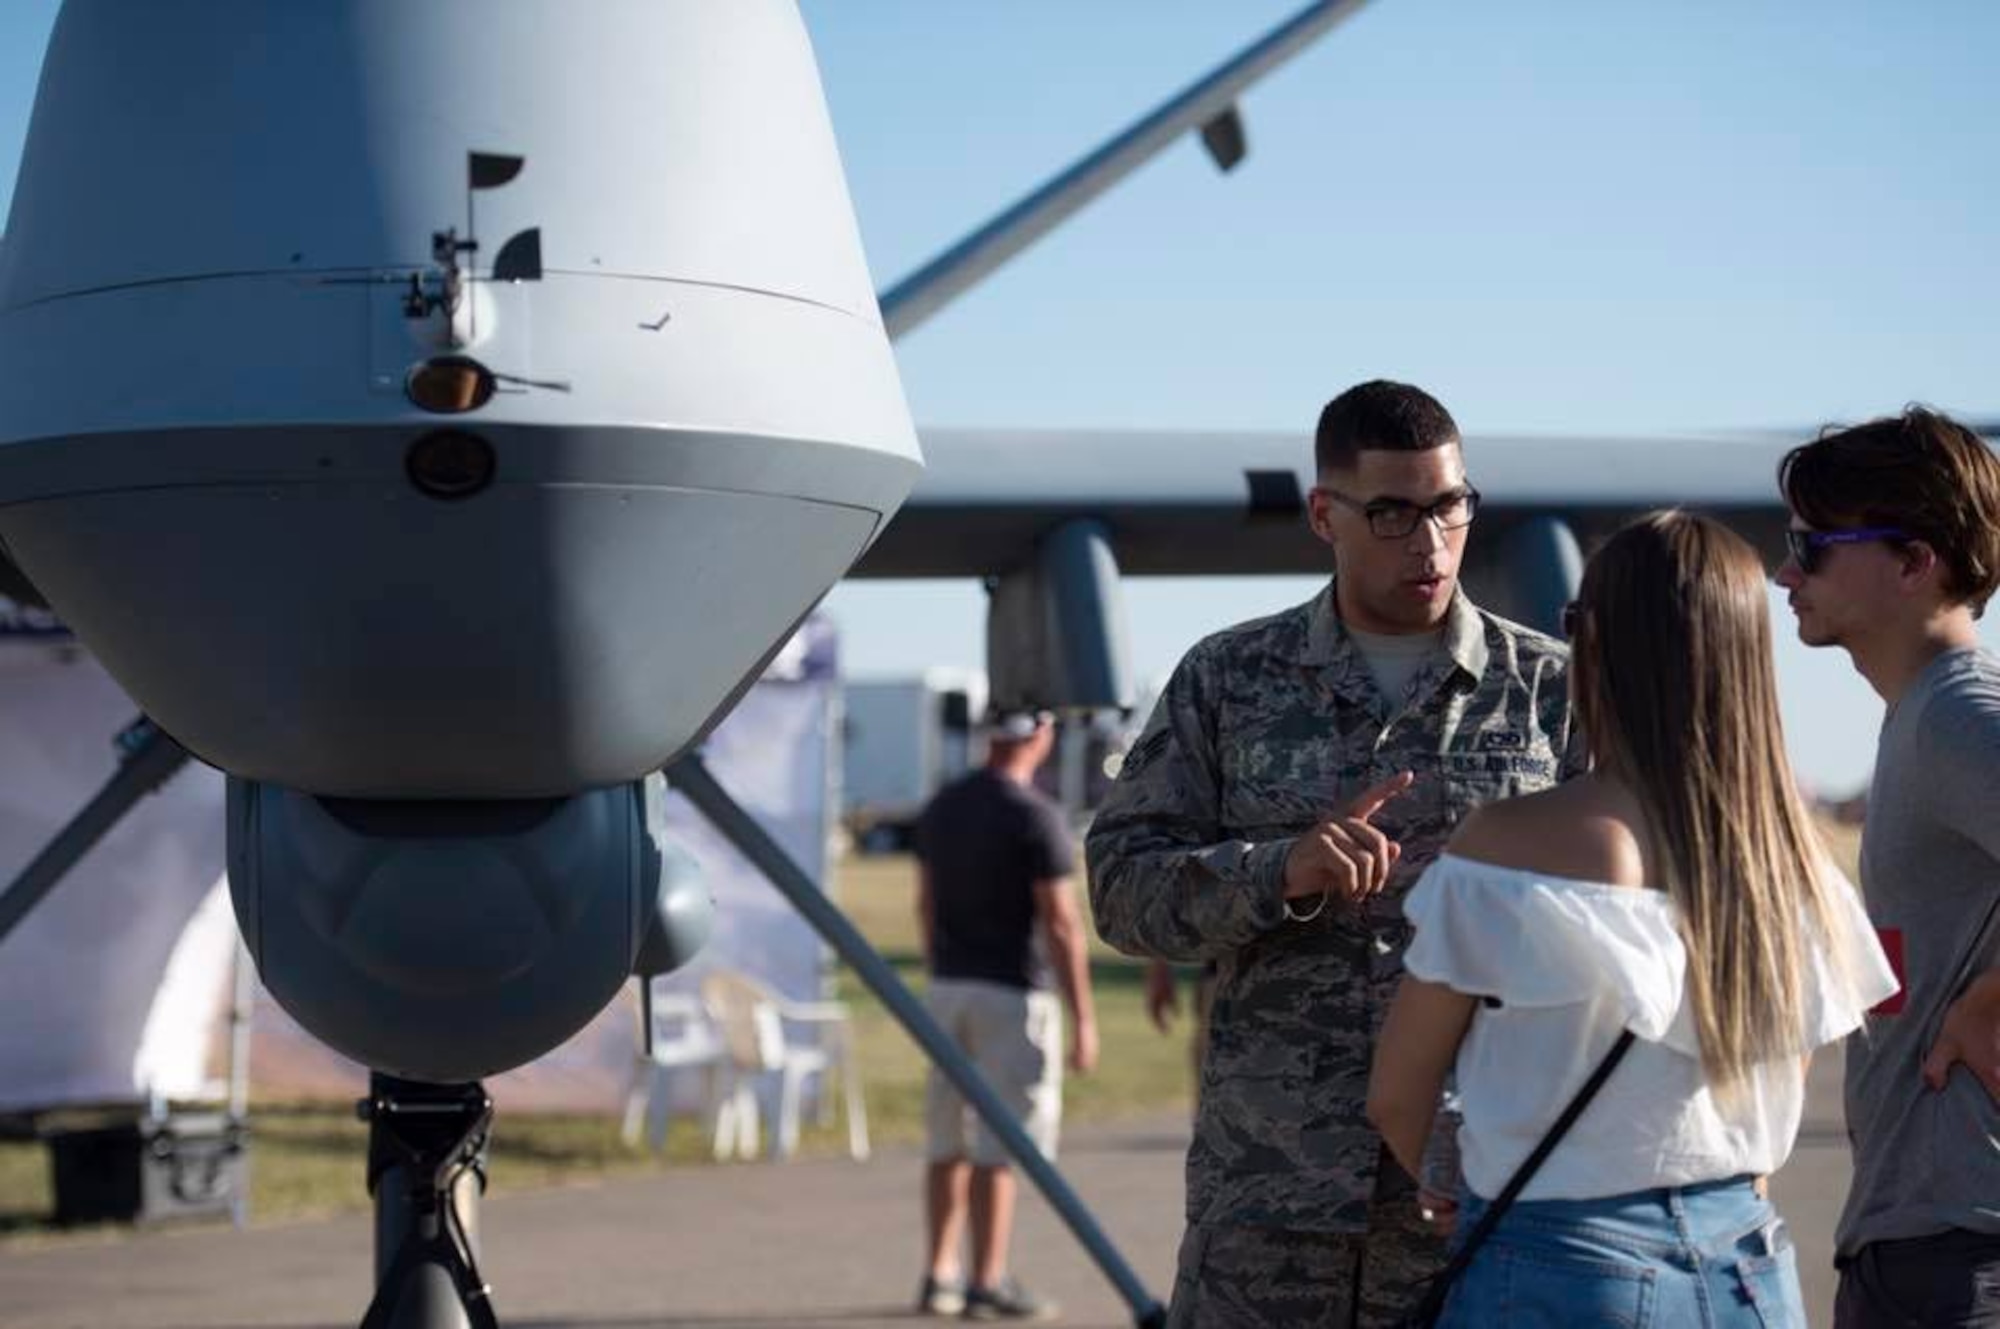 Senior Airman Benjamin, 432nd Aircraft Maintenance Squadron avionics journeyman, brief Canadian locals at the Lethbridge International Air Show July 14-16, 2017, in Alberta, Canada. The air show included various air demonstrations and statics from both Canada and the U.S. and featured representation of the U.S. Navy, Marines, and Army services. (U.S. Air Force photo/Master Sgt. Nadine Barclay)